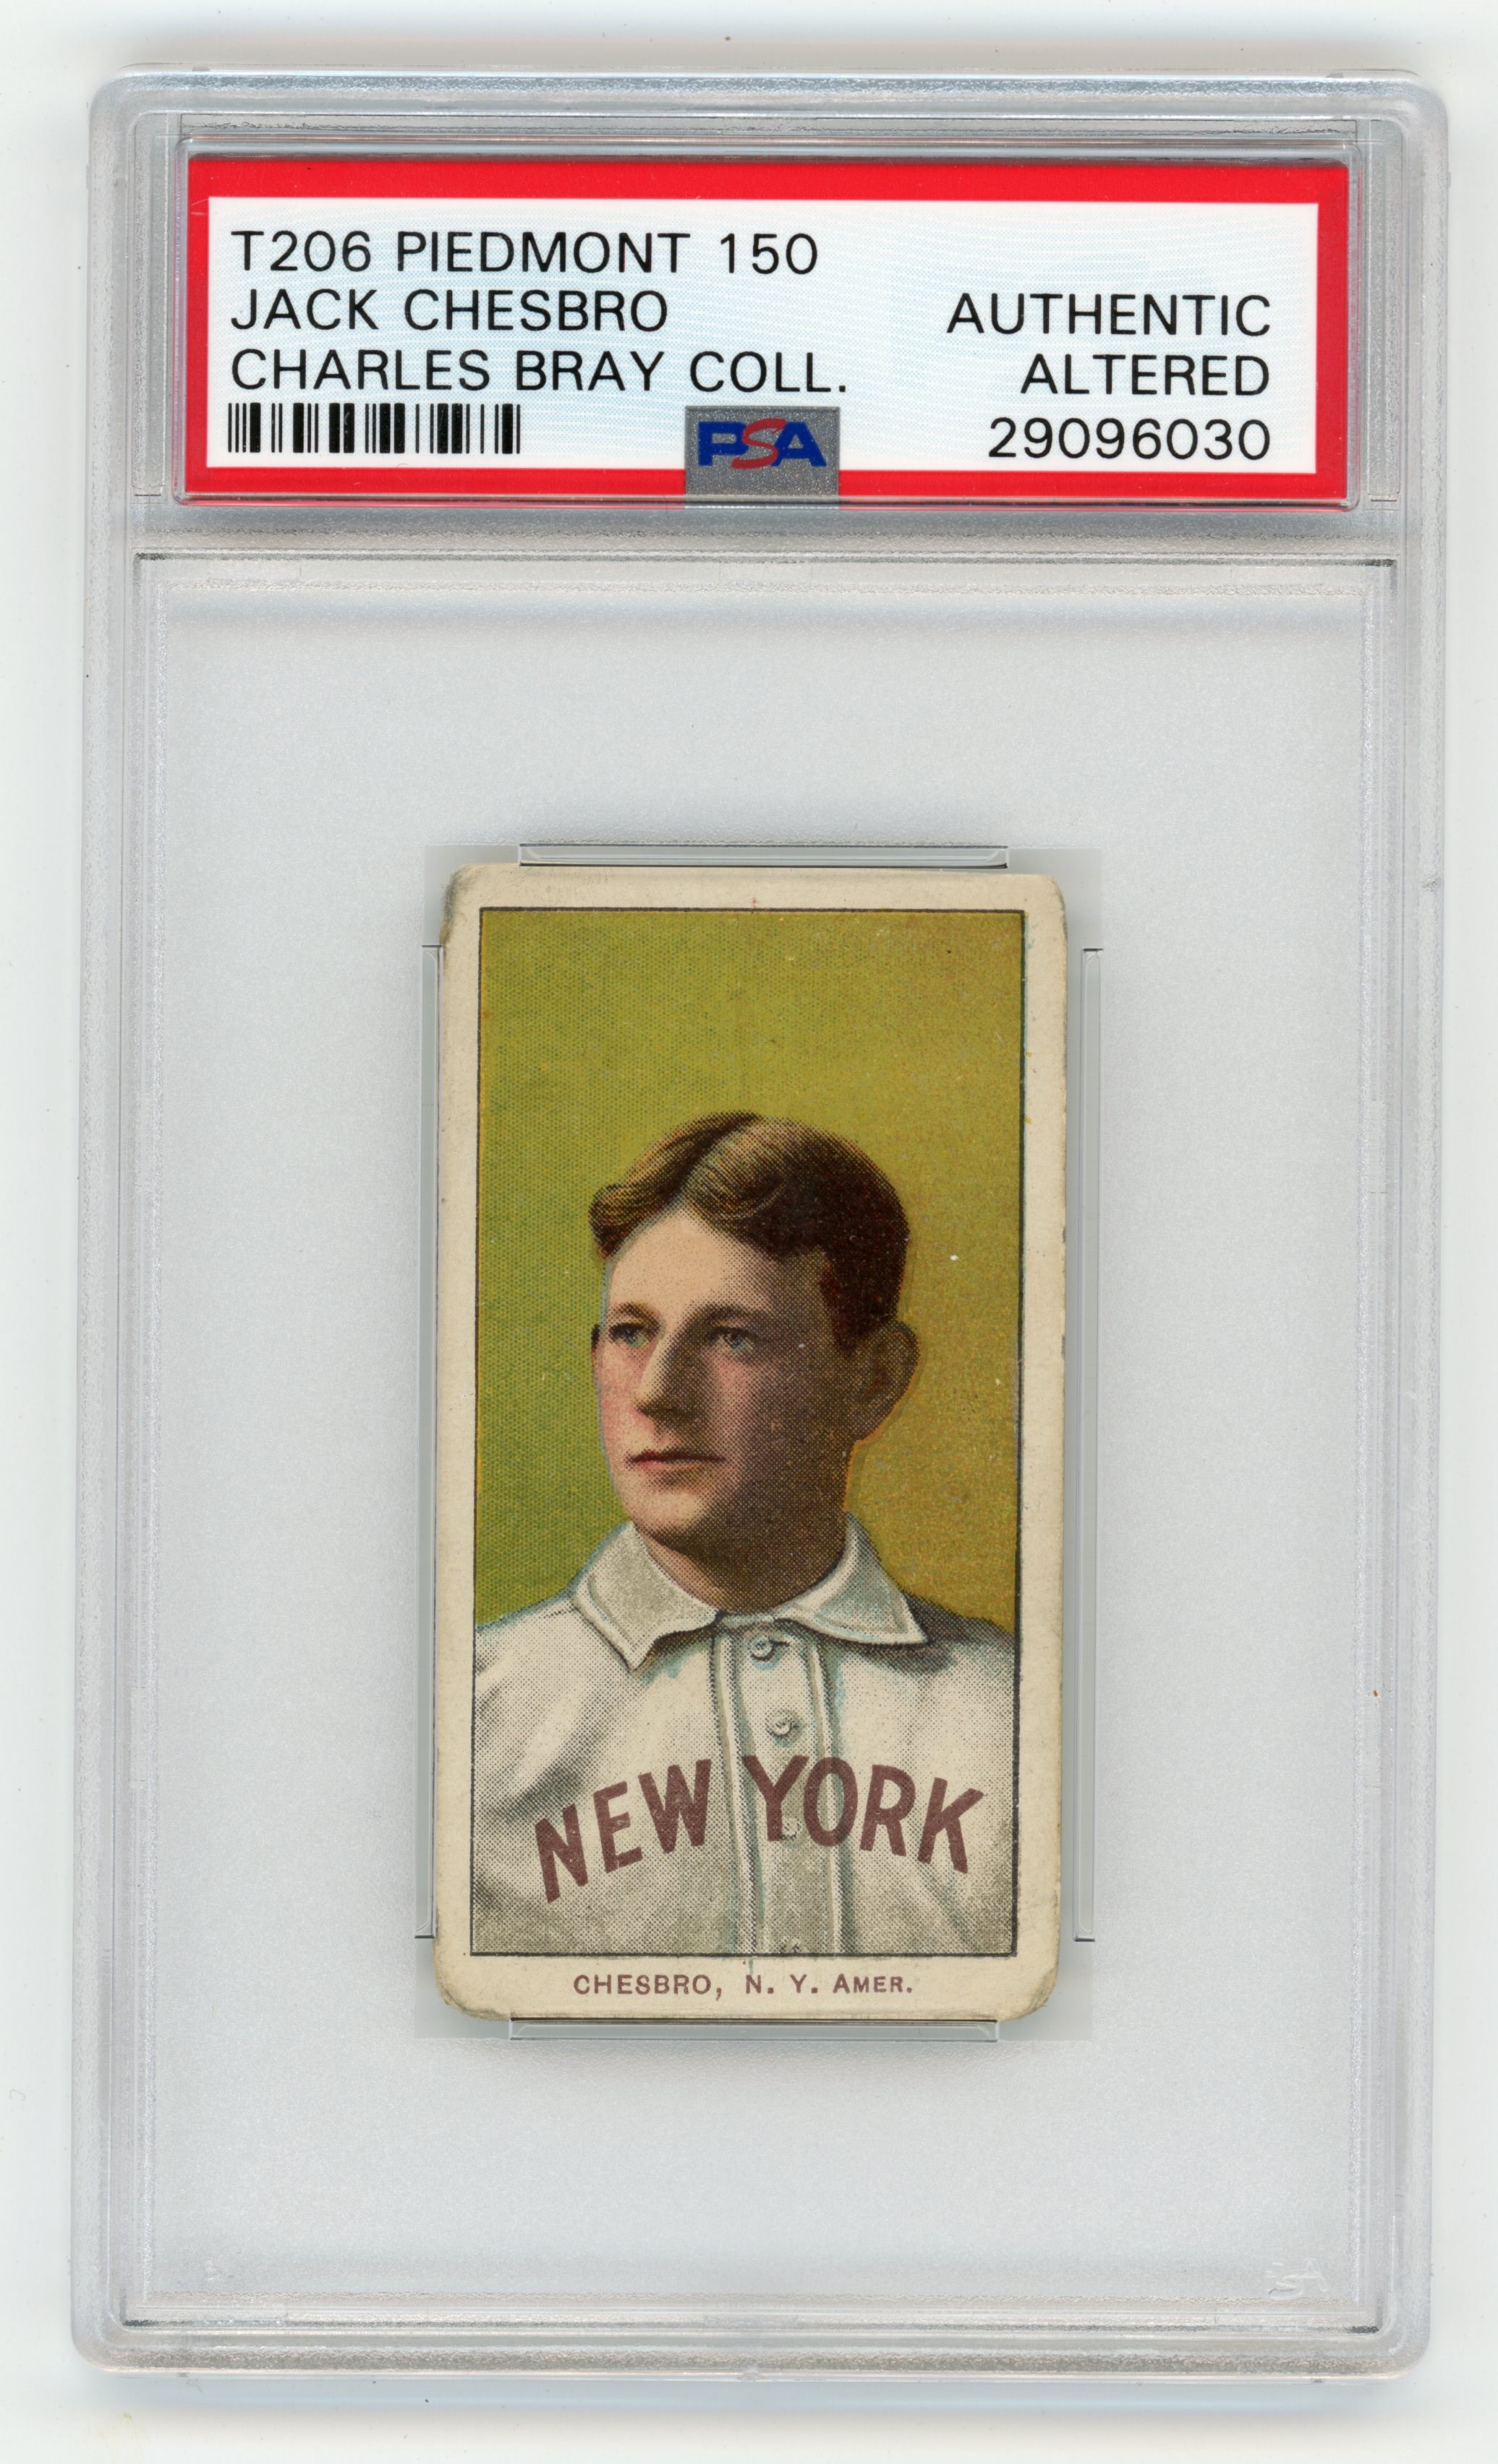 Baseball and Trading Cards - T206 Piedmont 150 Jack Chesbro PSA AA From The Charles Bray Collection